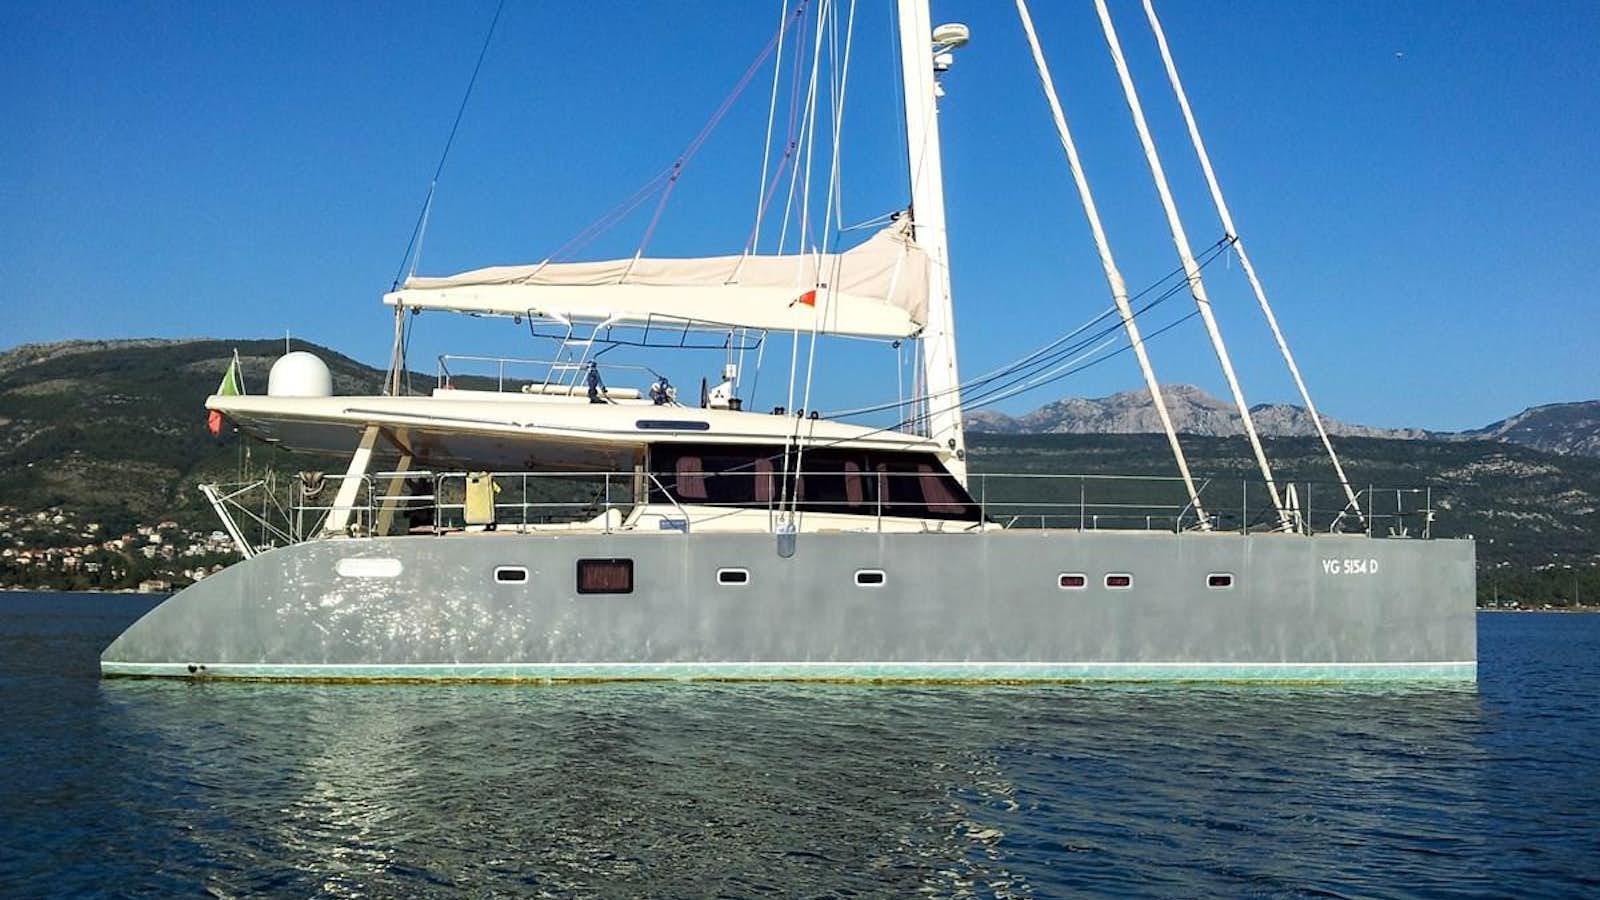 Capolino
Yacht for Sale